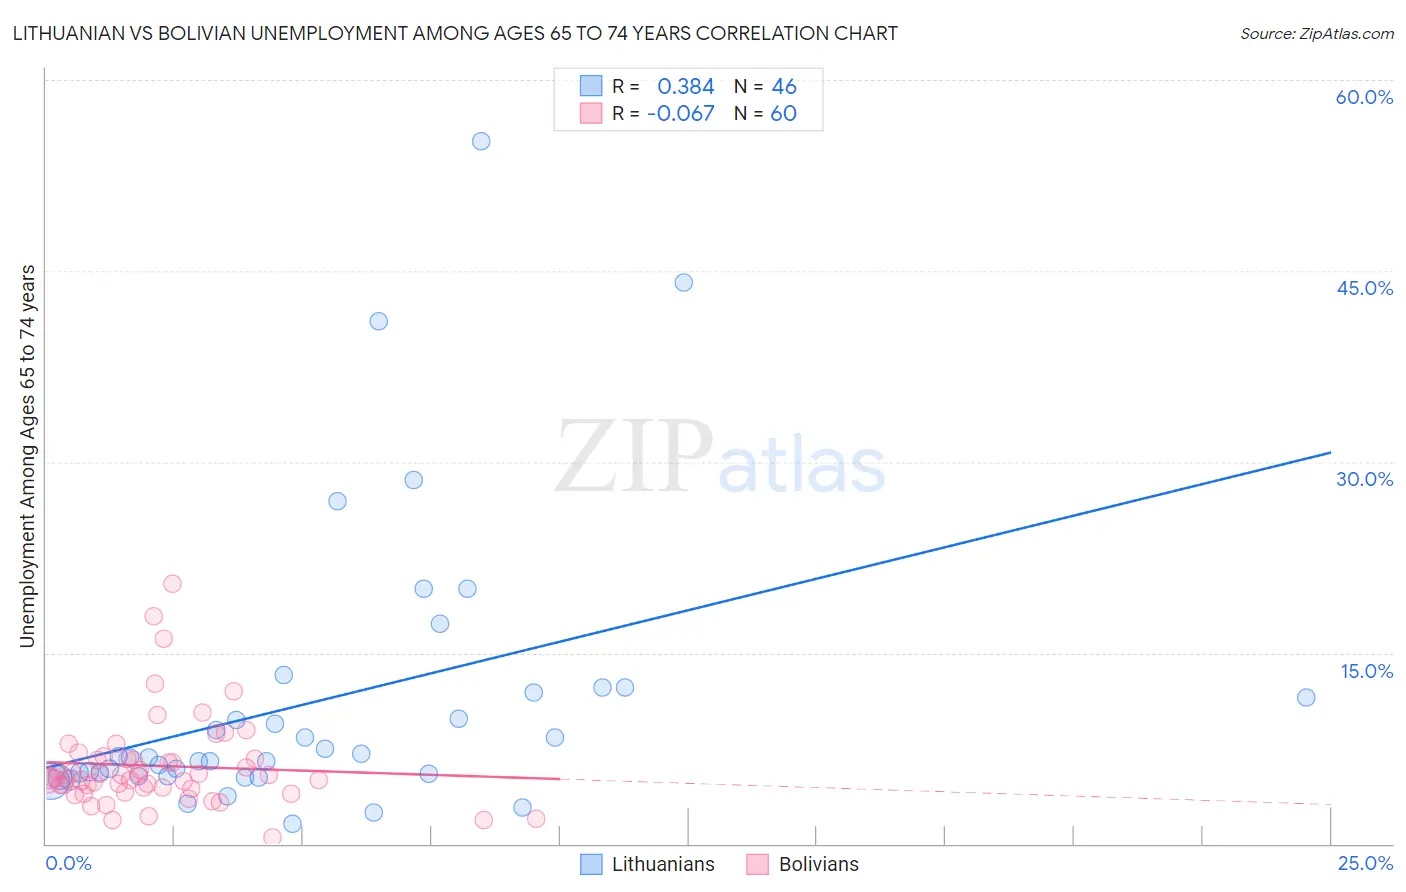 Lithuanian vs Bolivian Unemployment Among Ages 65 to 74 years